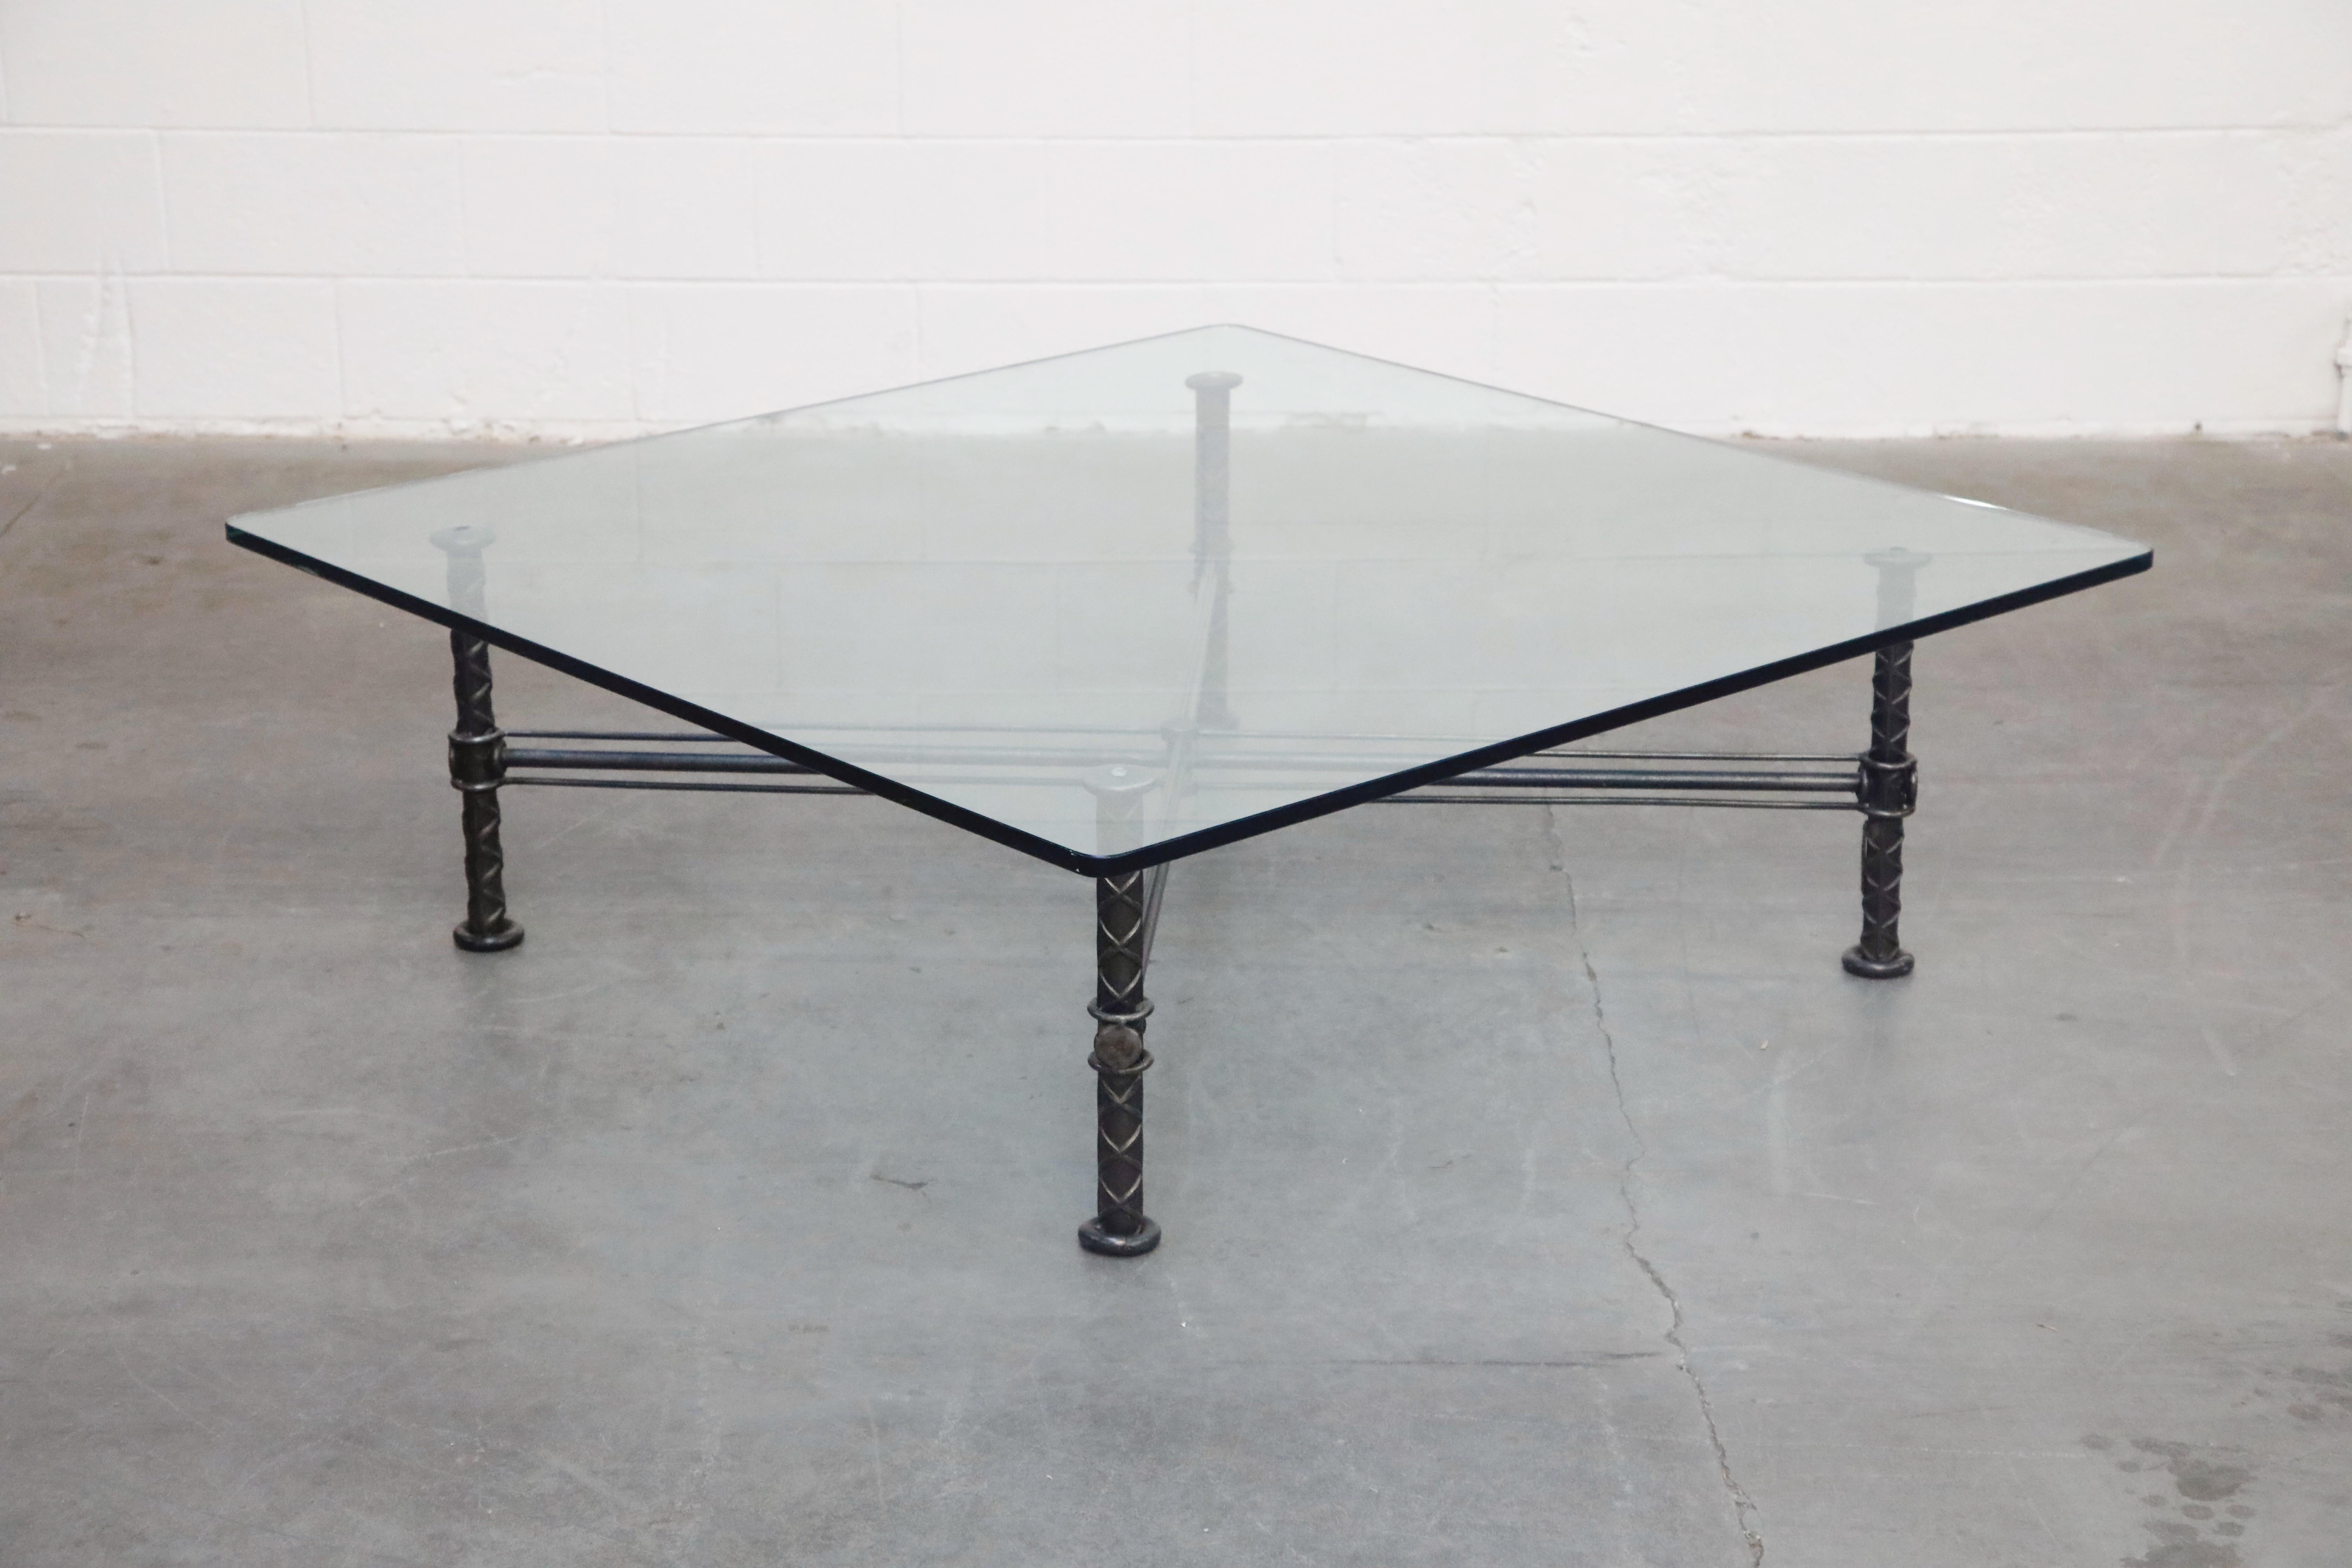 This fascinating sculpted steel coffee table by Israeli artist Ilana Goor is signed and numbered 4 of an edition of 100, is in incredible showroom condition, and ready to grace the interior of a designer home. 

This large 52